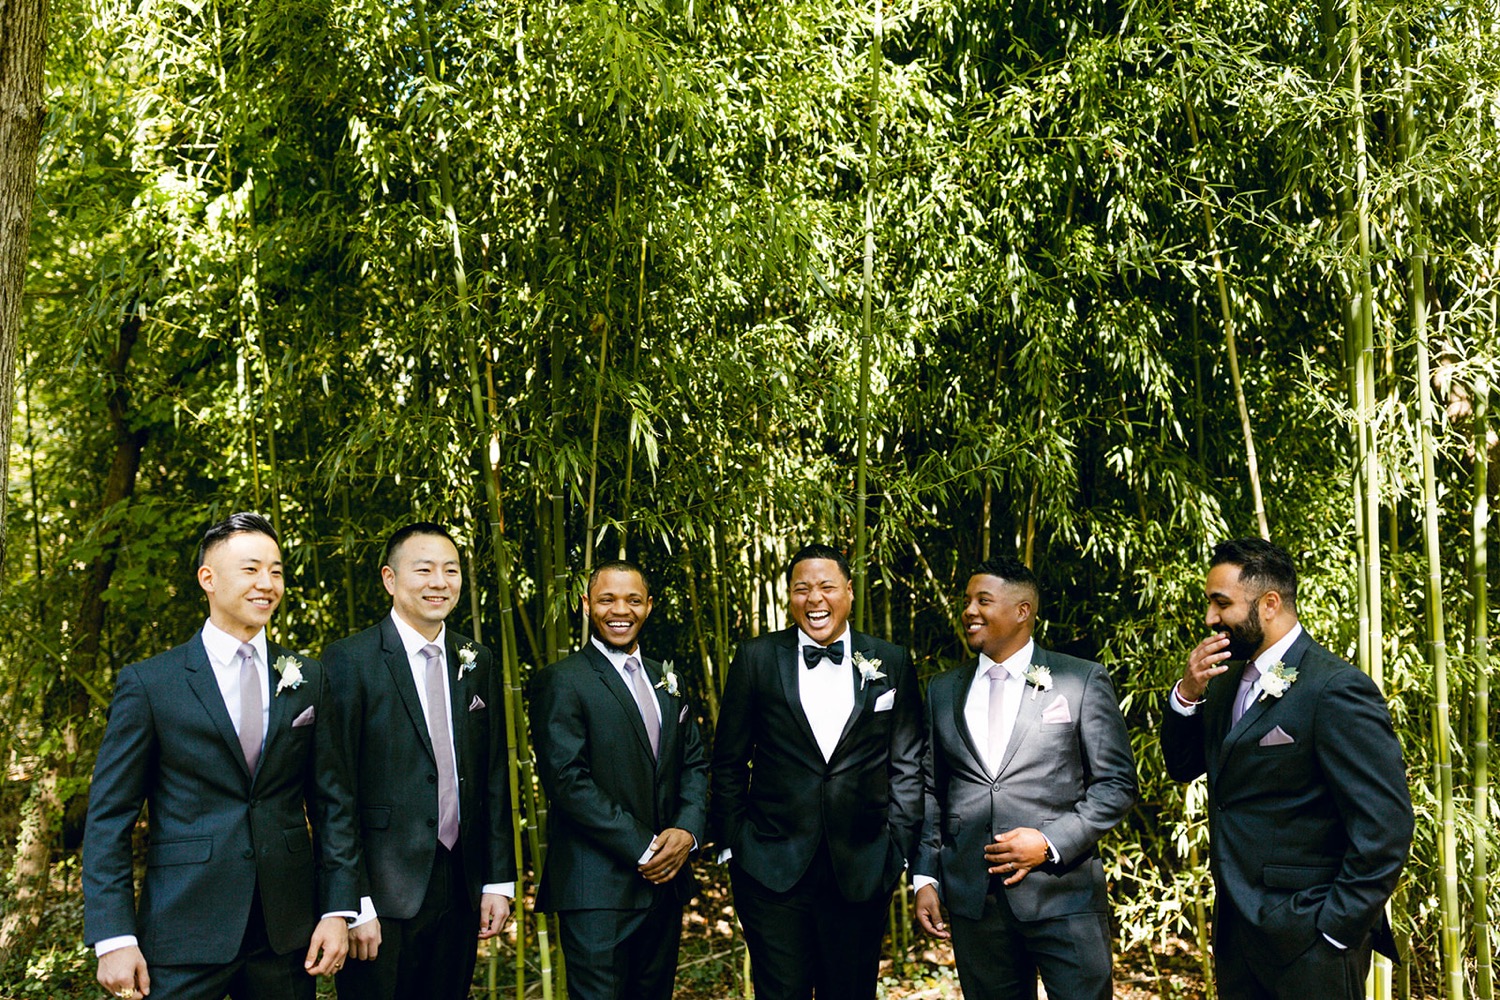 groom and groomsmen laughing wedding party candid